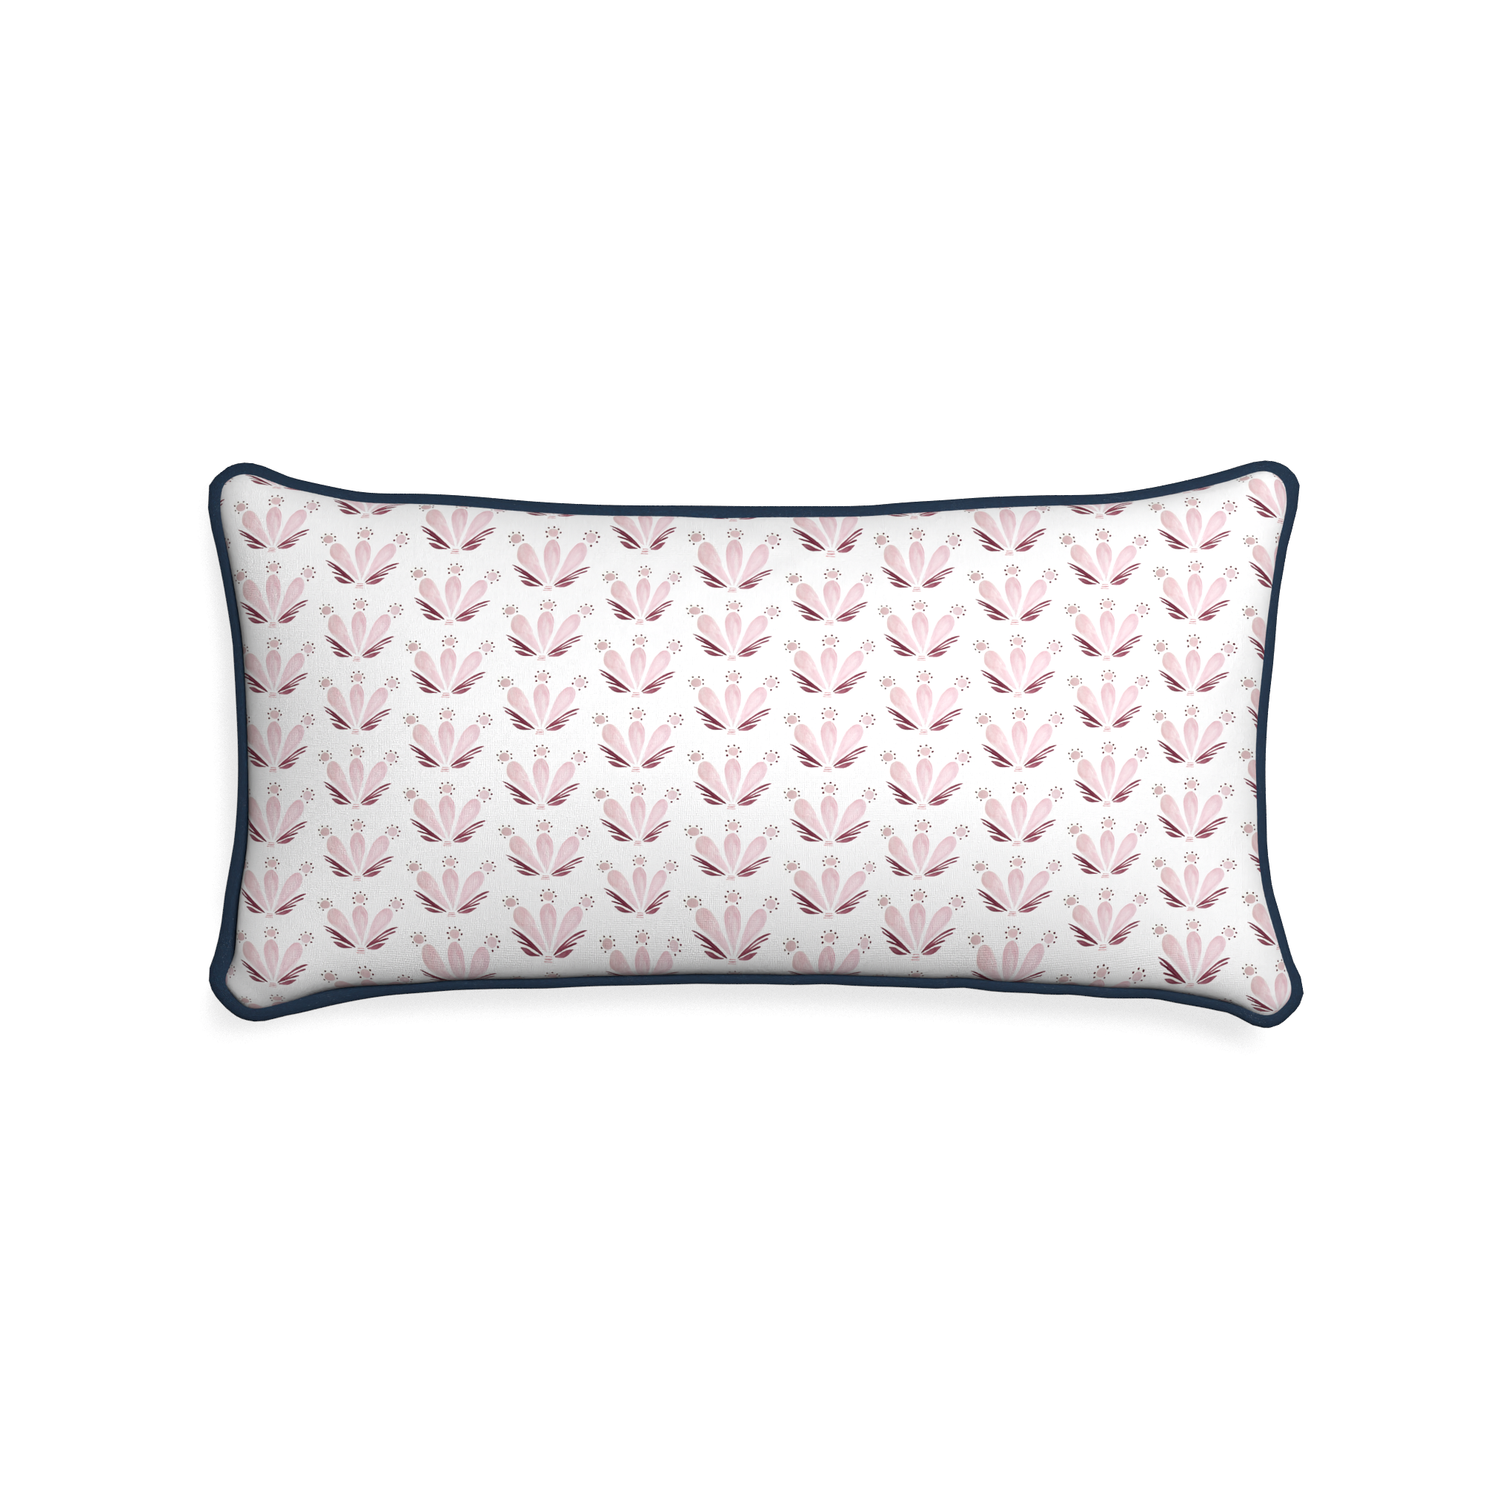 Midi-lumbar serena pink custom pink & burgundy drop repeat floralpillow with c piping on white background